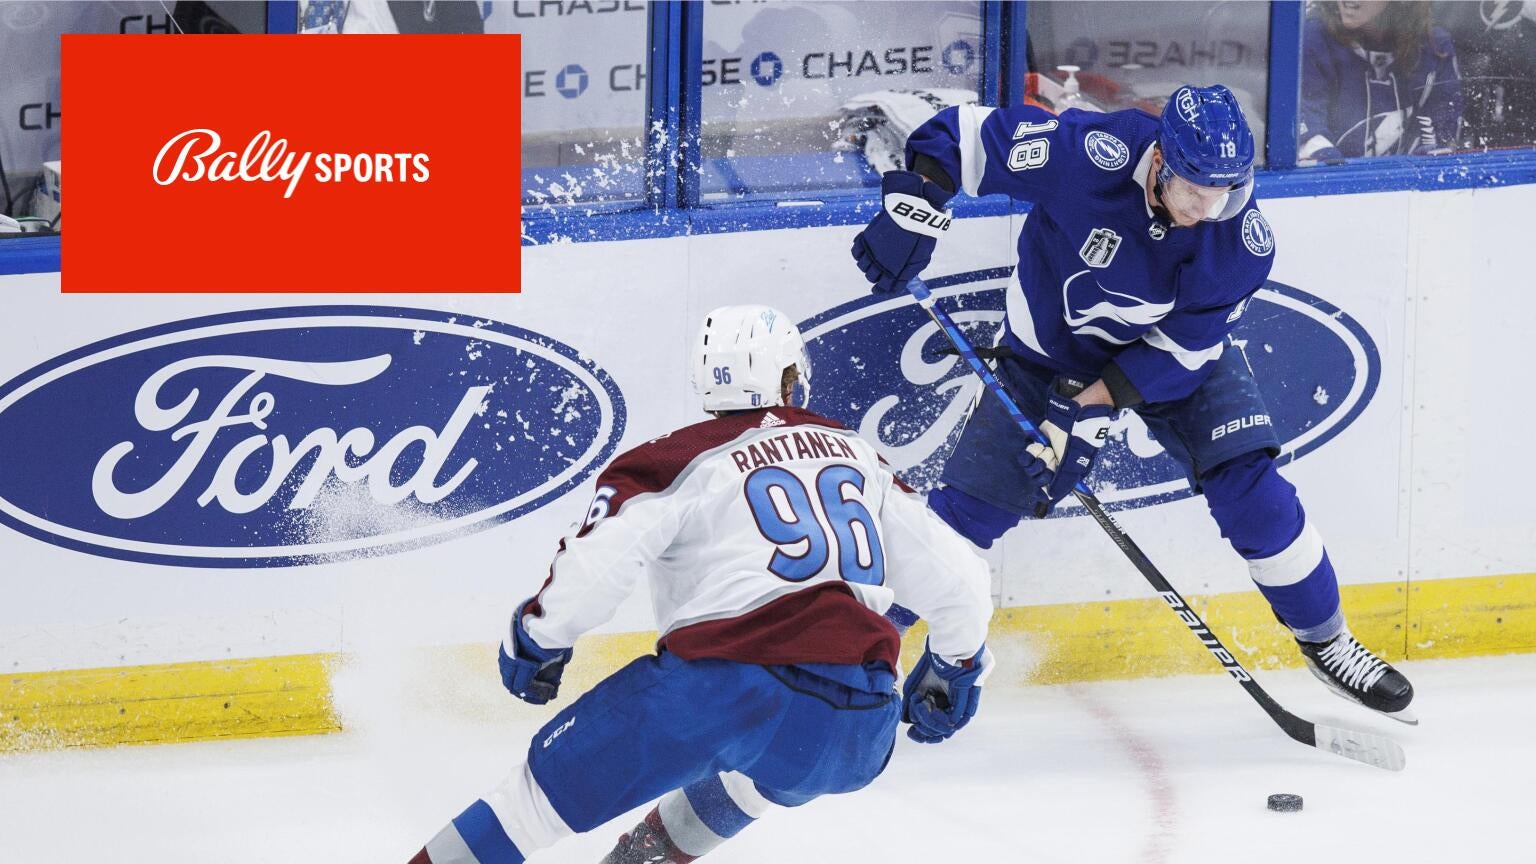 The Tampa Bay Lightning are one of the teams covered by a Bally Sports RSN